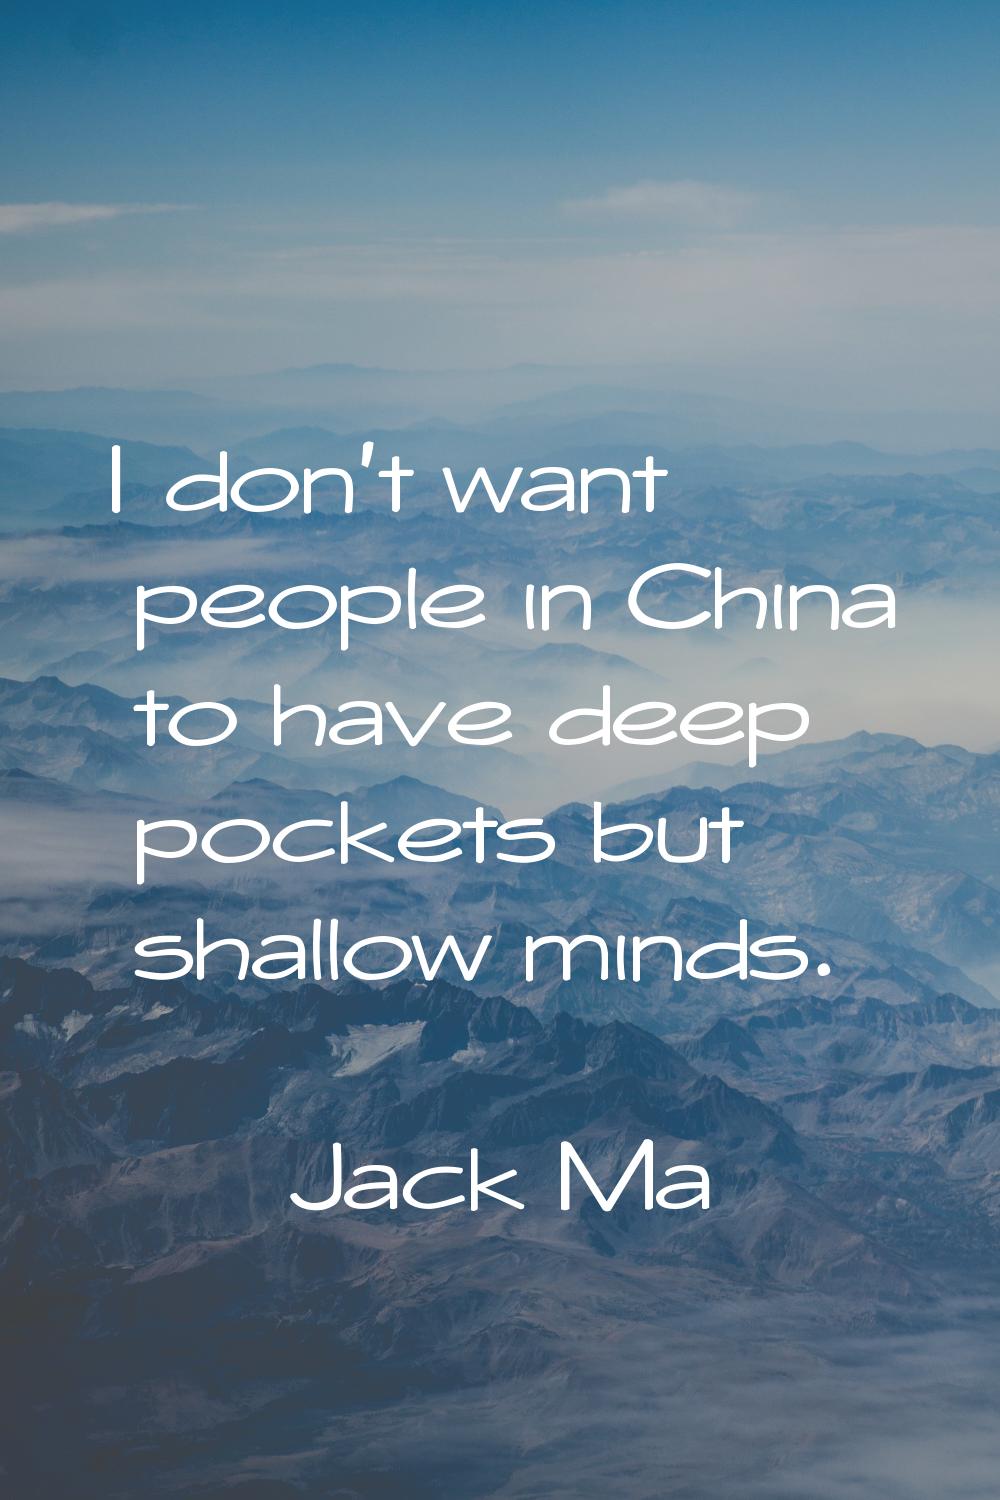 I don't want people in China to have deep pockets but shallow minds.